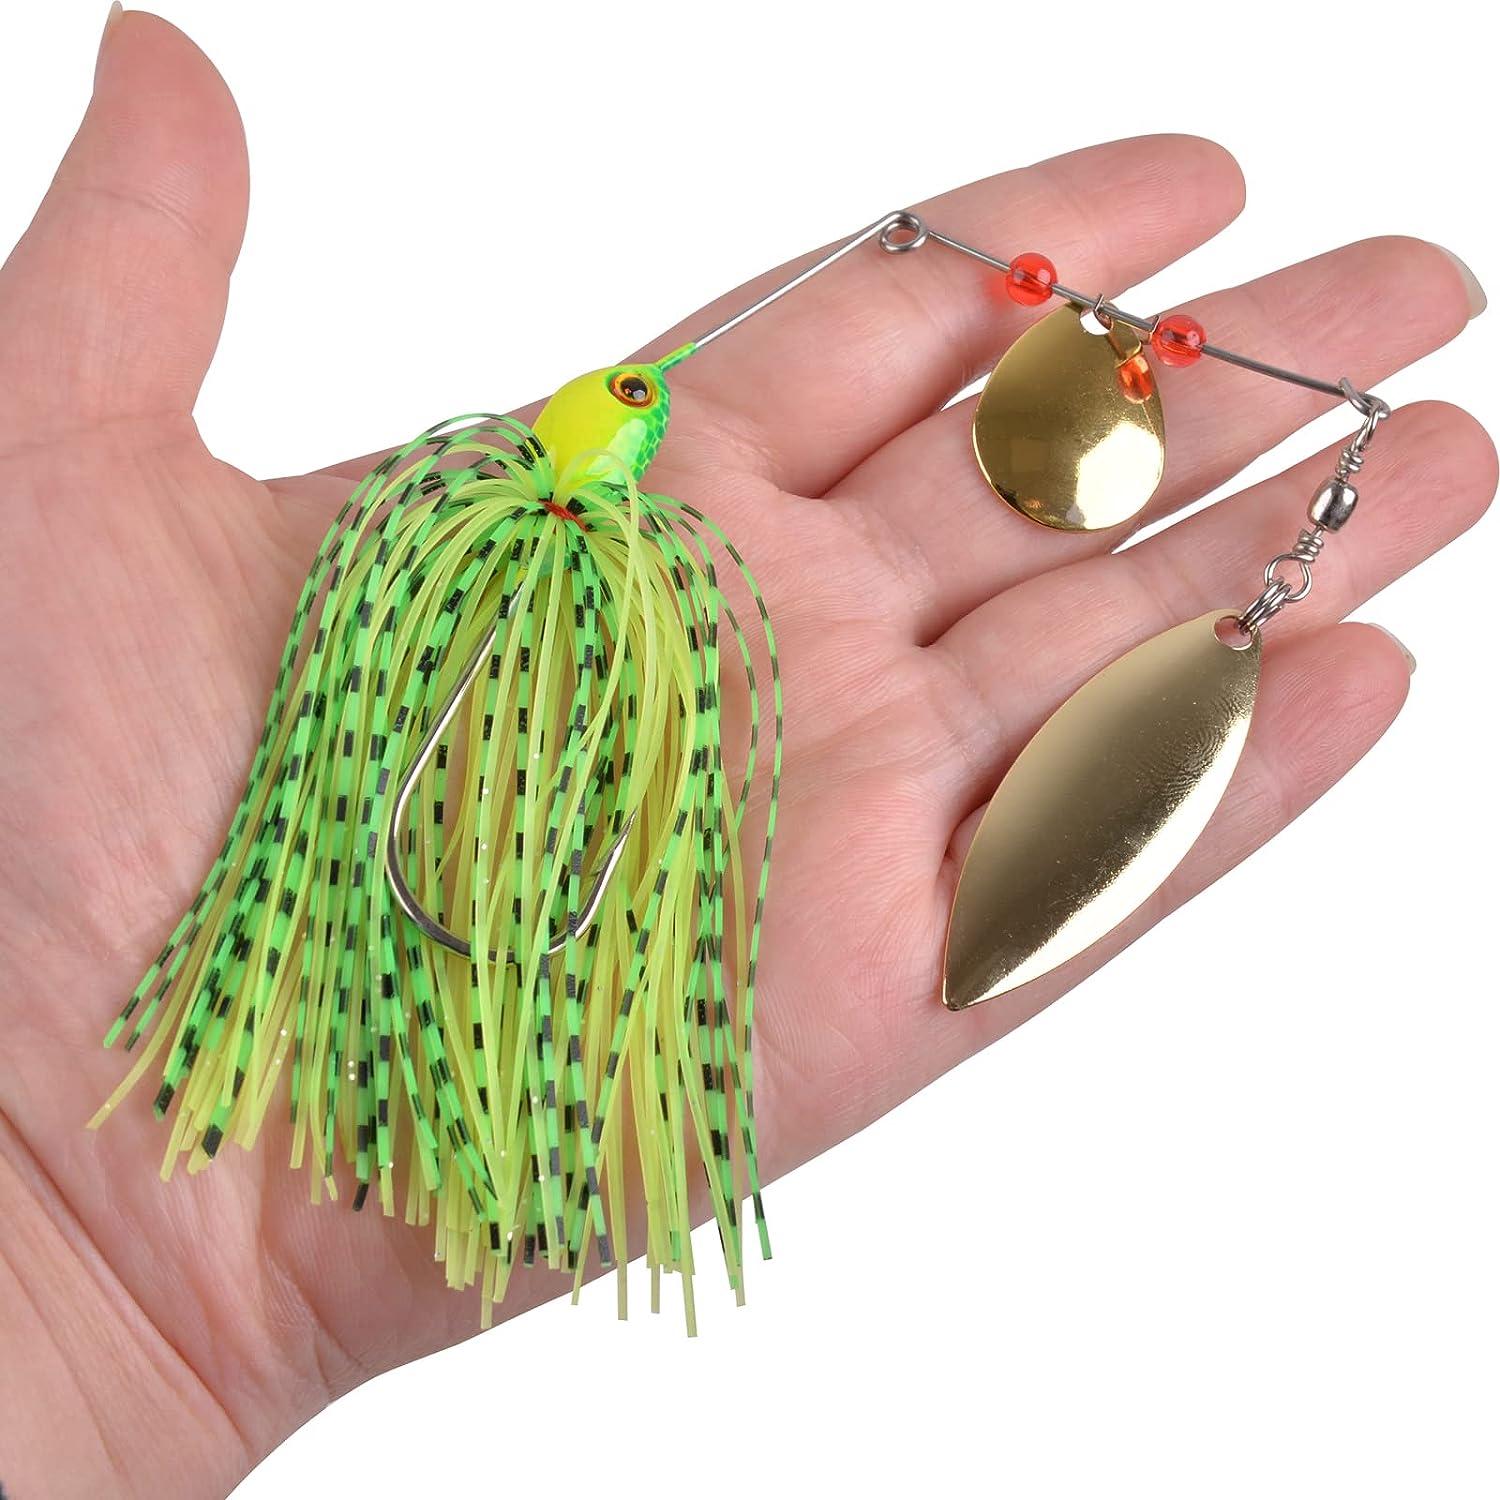 Fishing Lures Spinnerbait, Bass Fishing Lure Spinner Baits Kit Hard Metal  Multicolor Buzzbait Spinnerbait Jigs for Bass Pike Trout Salmon 6pcs  Spinnerbait